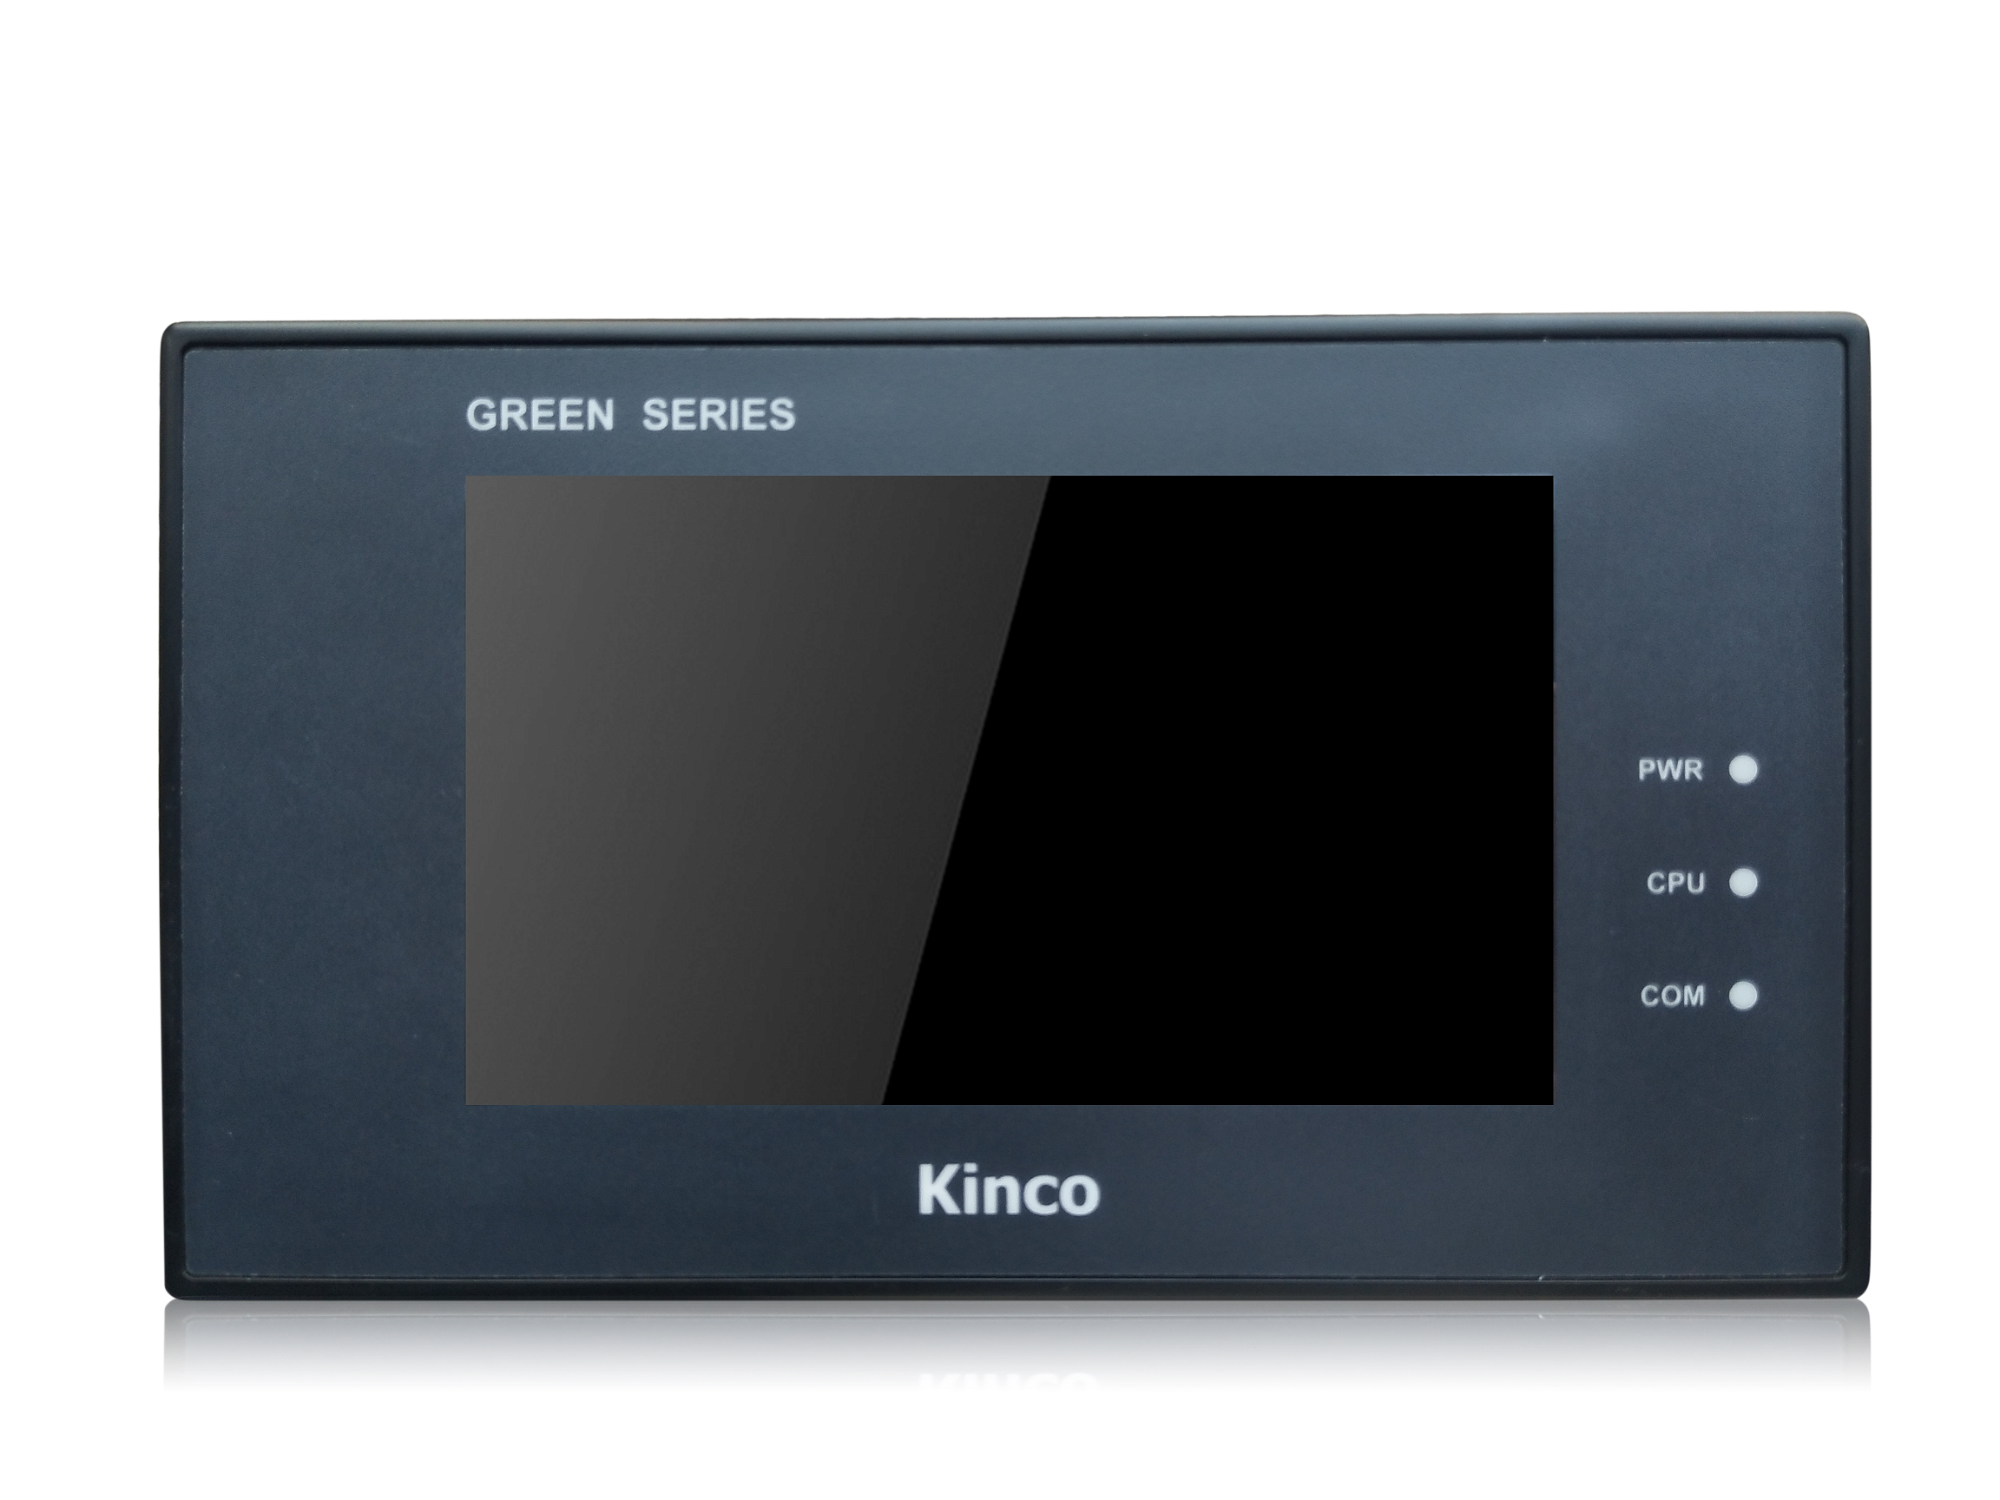 HMI touch panel from Kinco and Thinget with free software